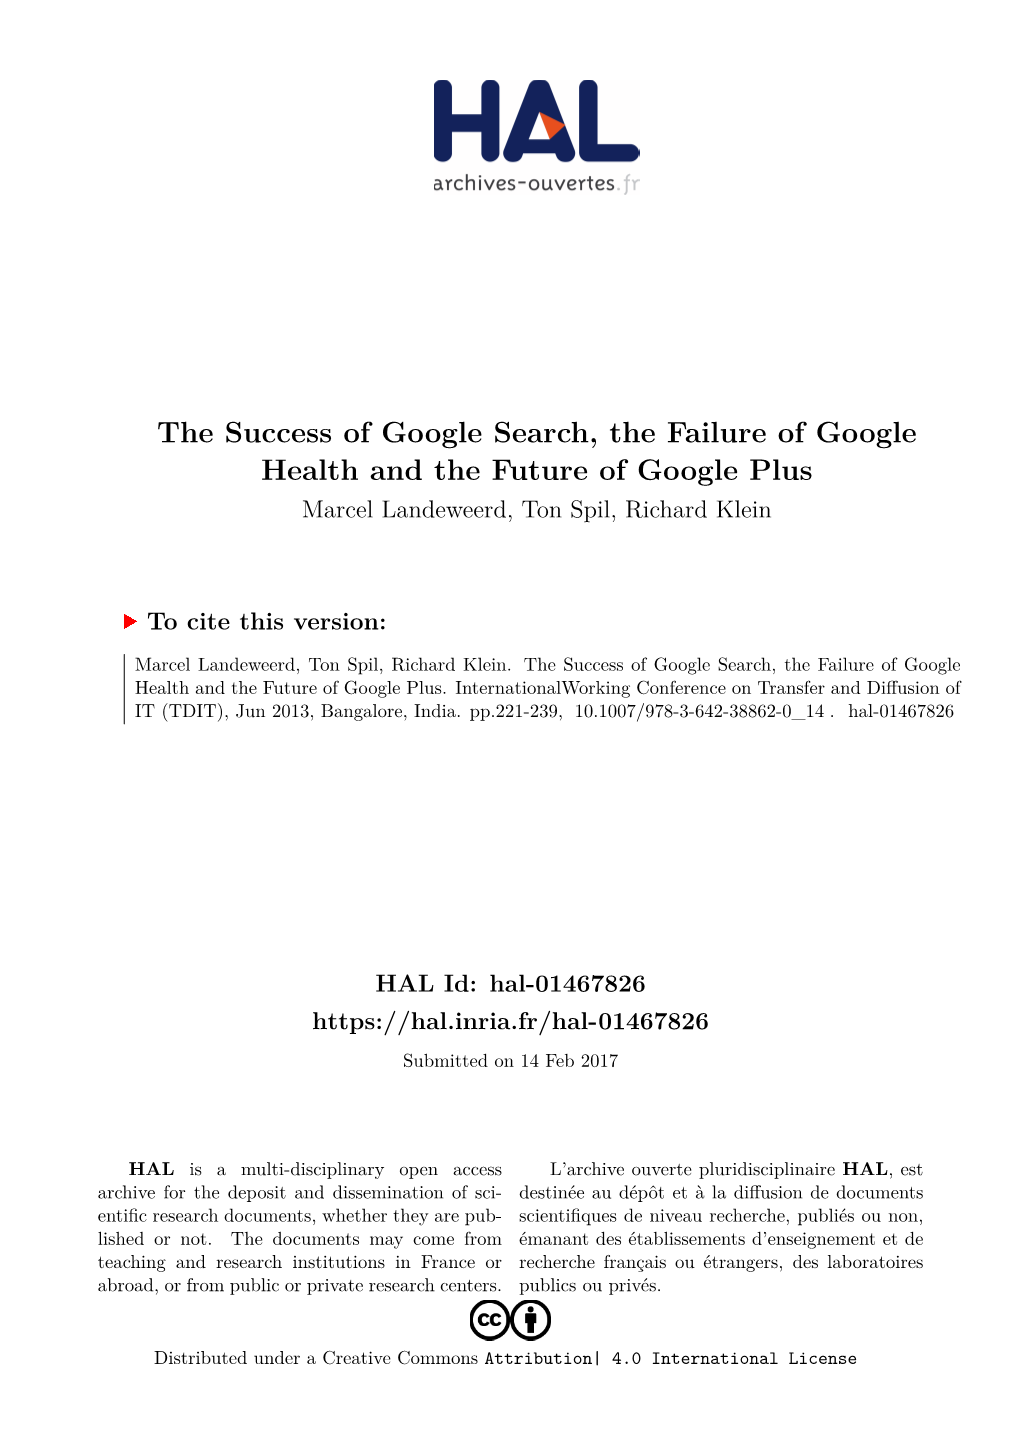 The Success of Google Search, the Failure of Google Health and the Future of Google Plus Marcel Landeweerd, Ton Spil, Richard Klein